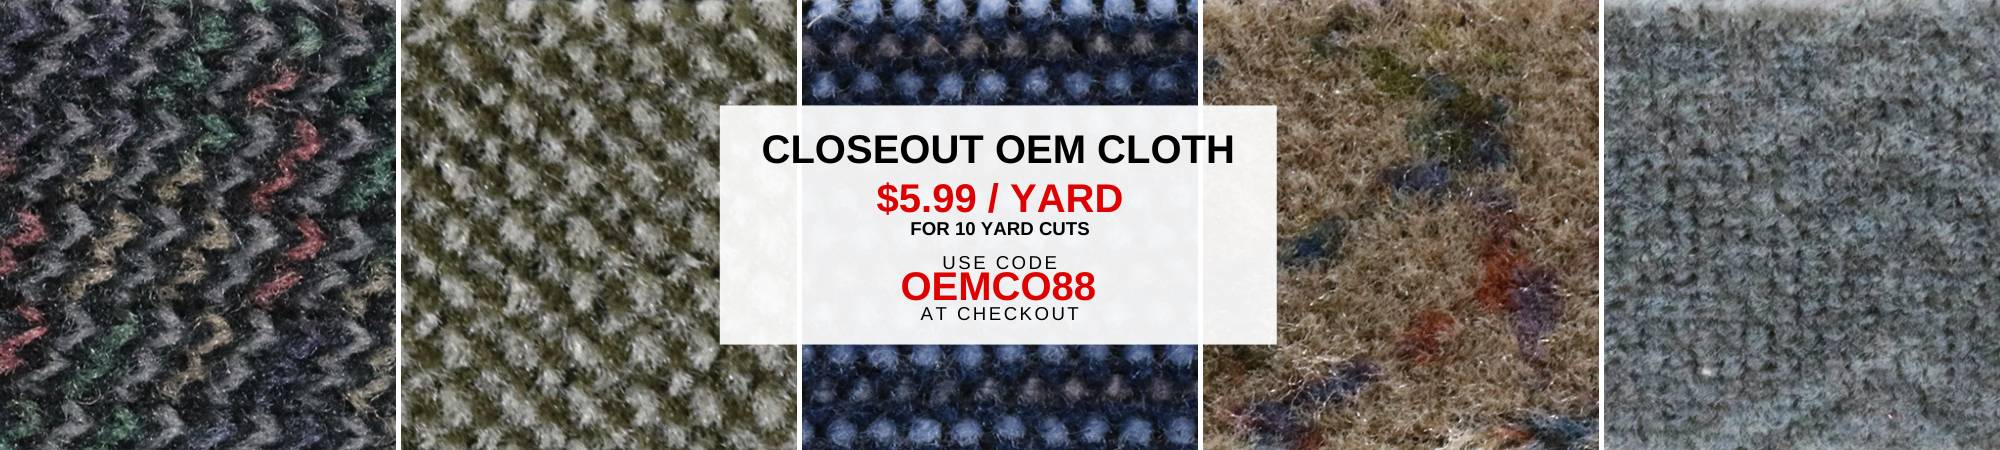 88% OFF 10 YARD CUTS OF OEM WITH CODE OEMCO88